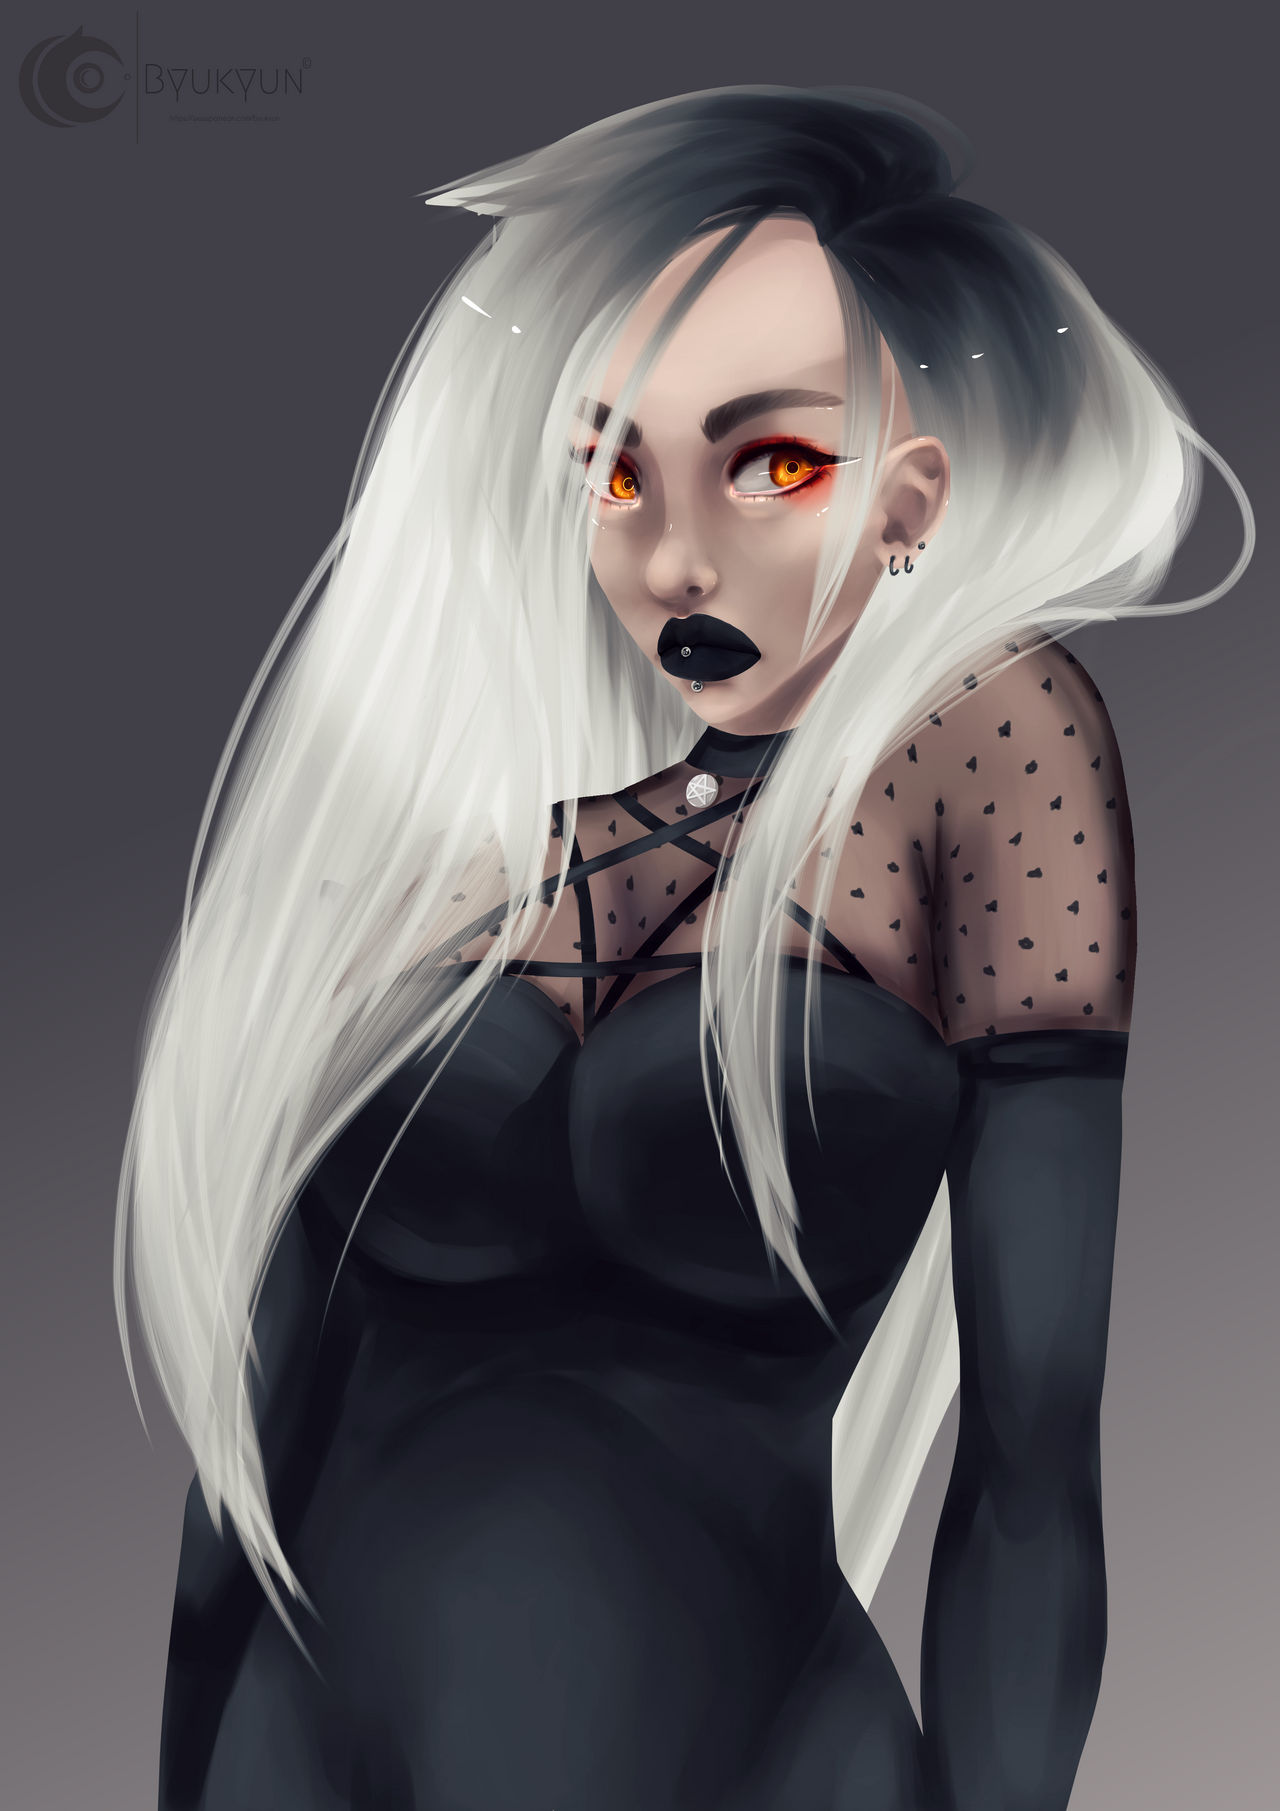 The Silver Haired Goth Girl! by softie20 on DeviantArt